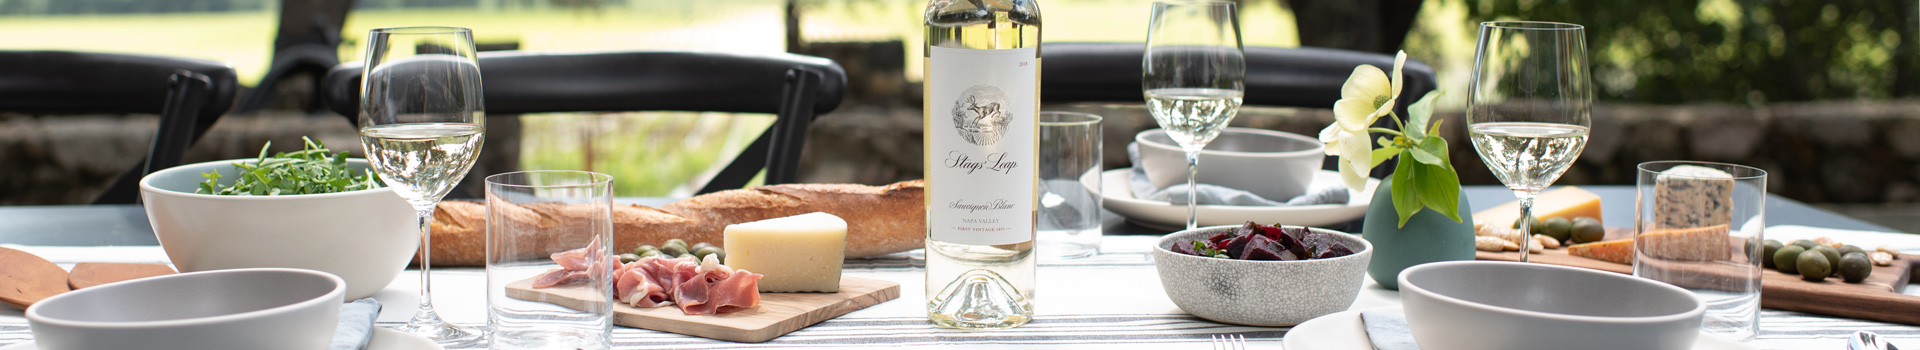 Stags' Leap Napa Valley Sauvignon Blanc Paired with Food